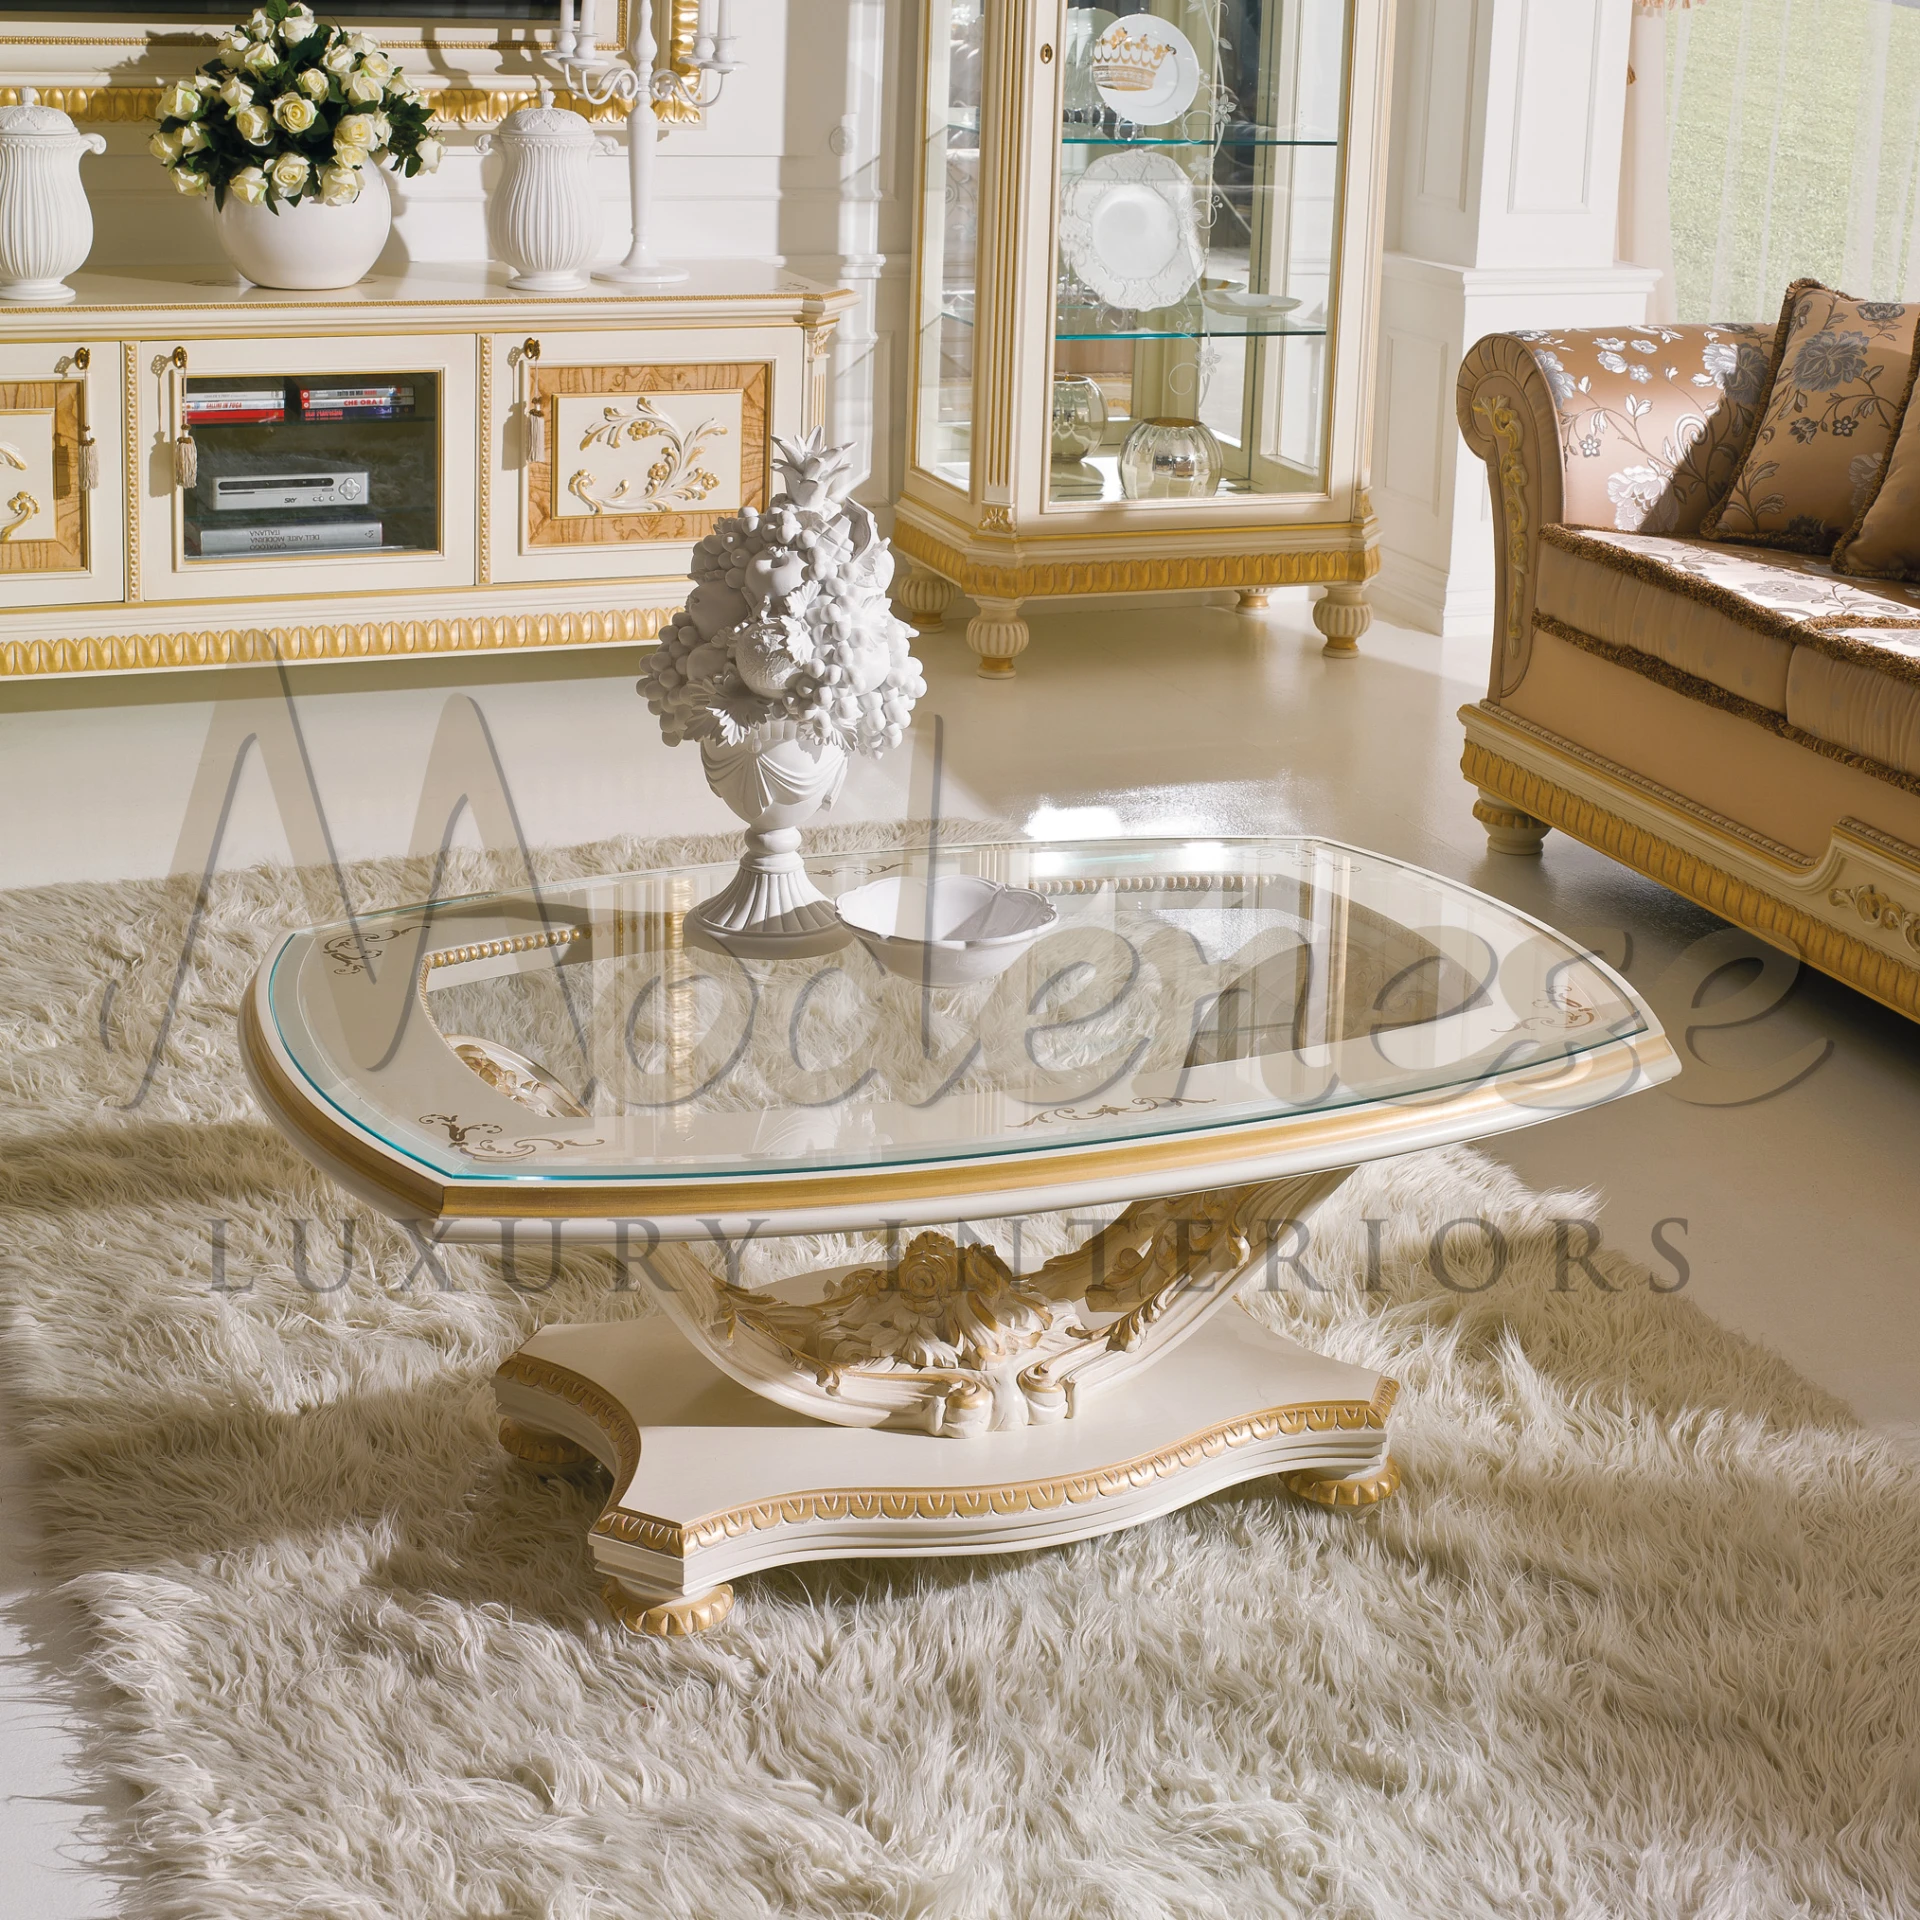 Italian-designed coffee table with classic style and opulent allure.